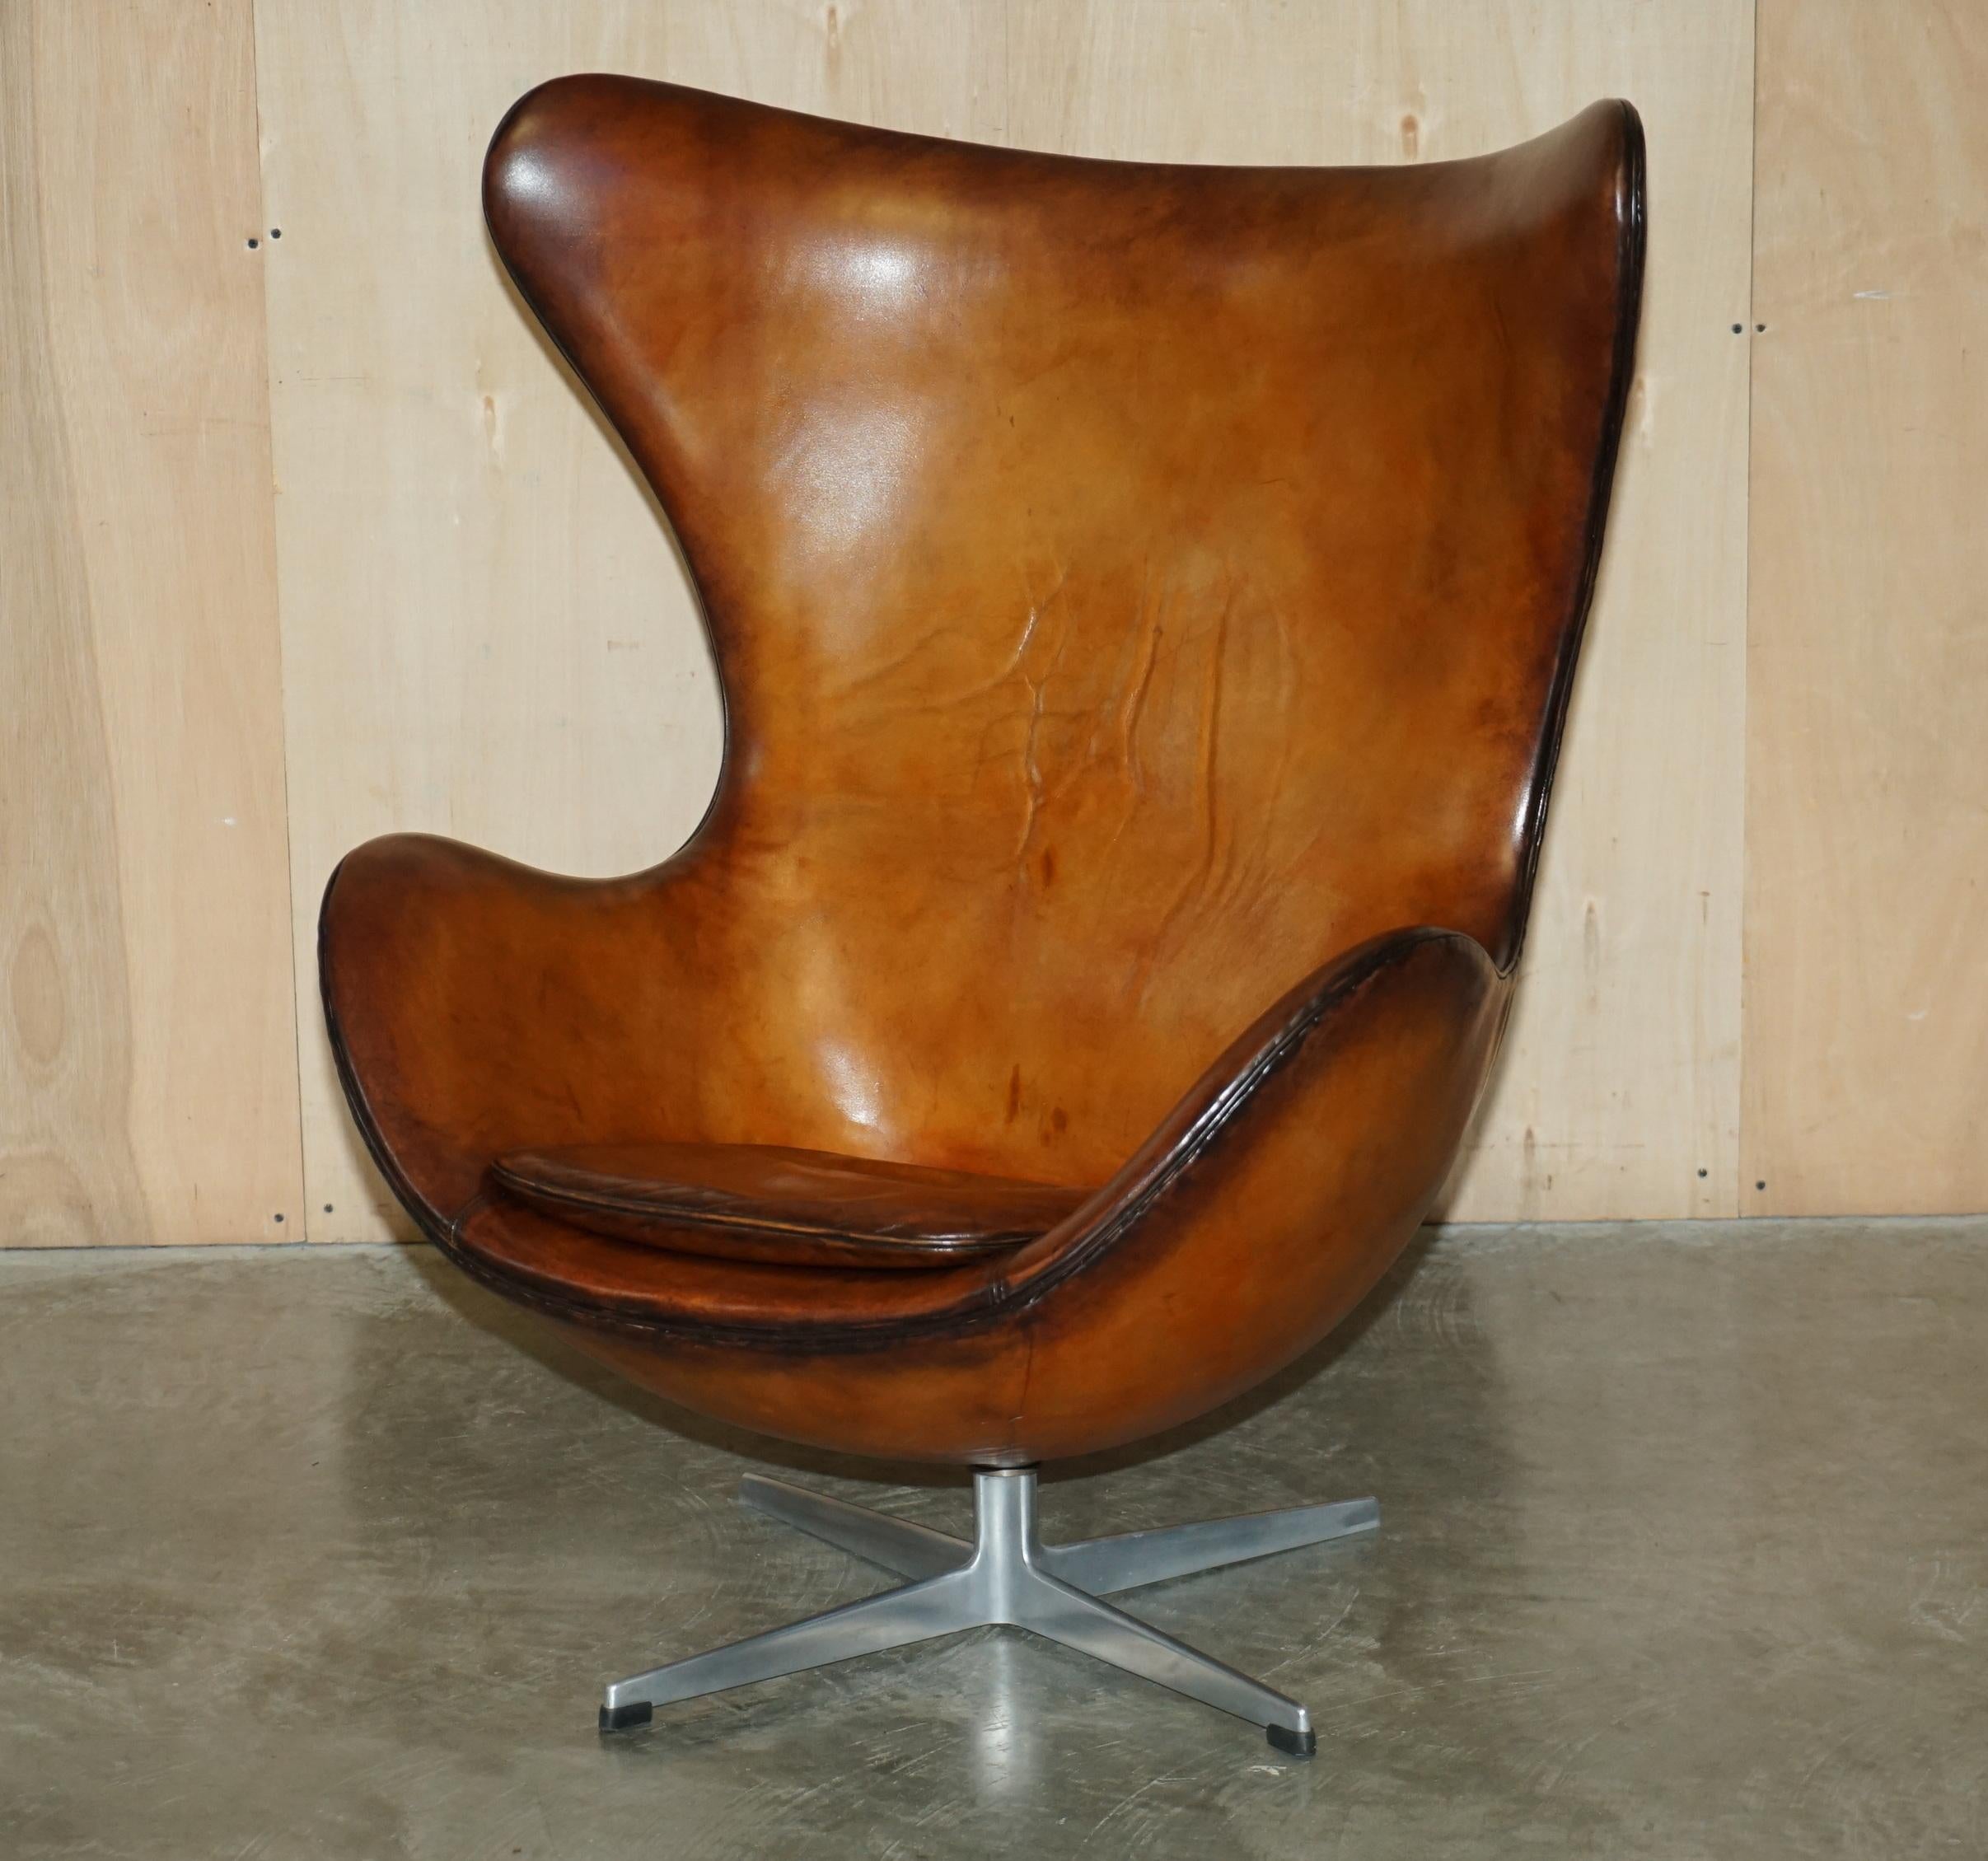 Royal House Antiques

Royal House Antiques is delighted to offer for sale this very significant, original fully stamped 1968 Fritz Hansen, completely restored egg chair with matching footstool

Please note the delivery fee listed is just a guide, it